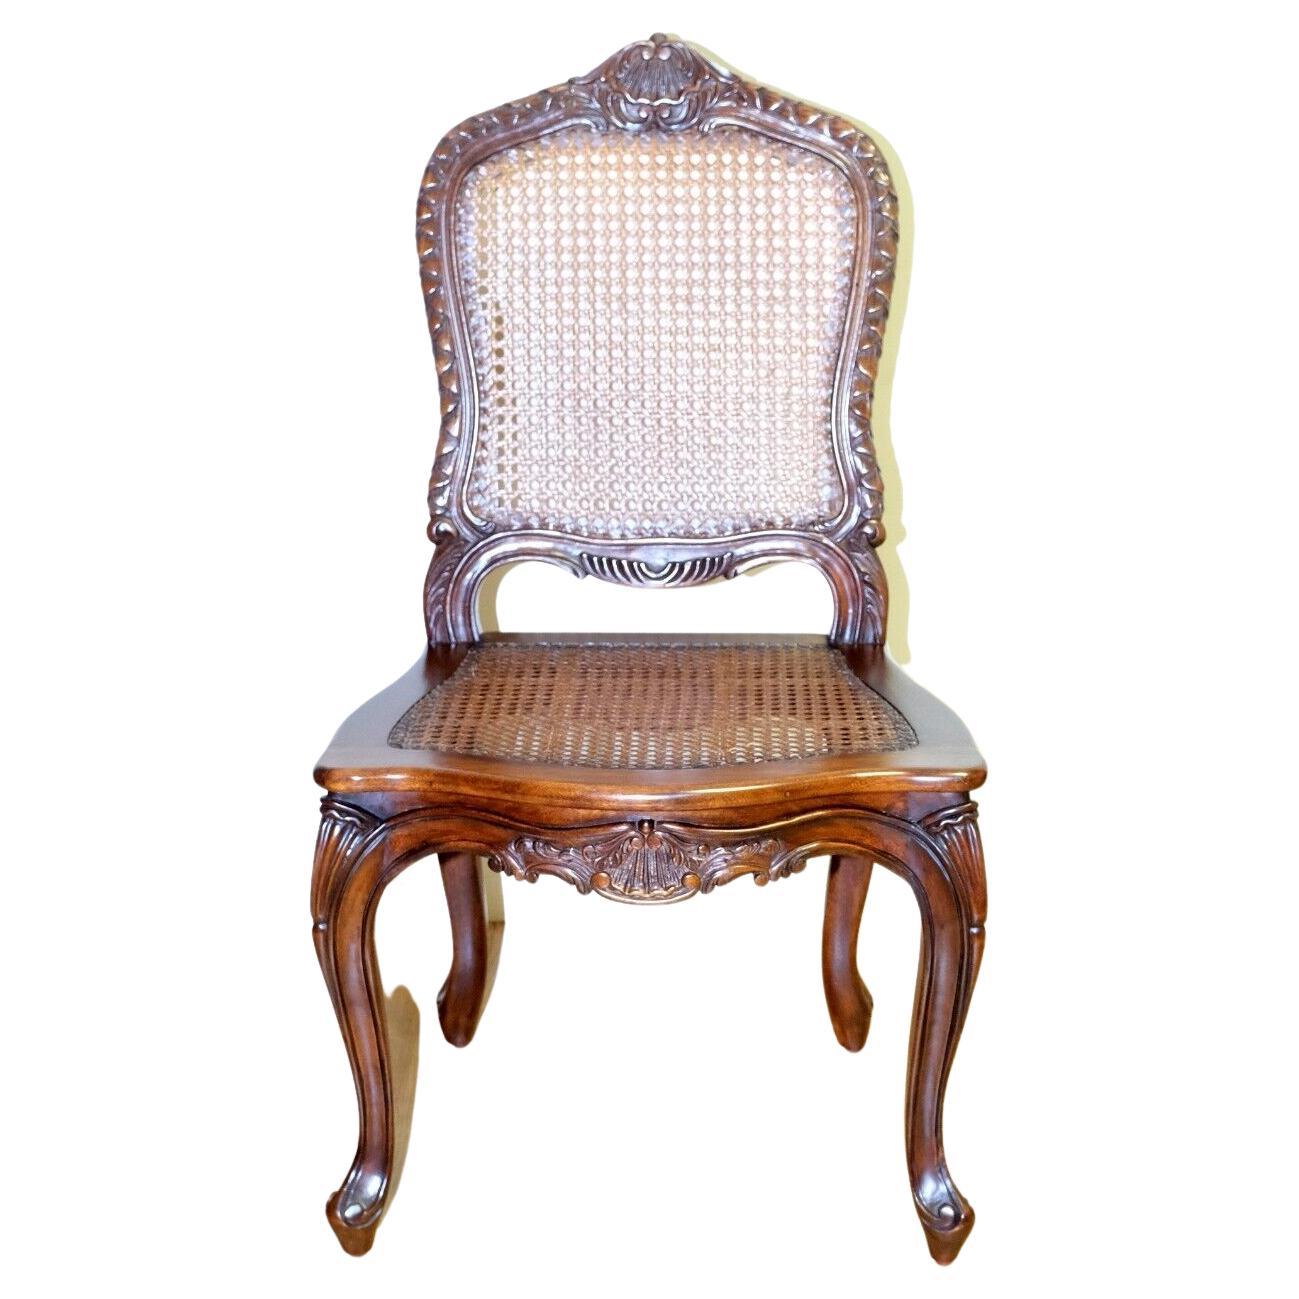 We are delighted to offer for sale this gorgeous And So To Bed occasional Beechwood hand-carved cane seat chair. 

This elegant floral hand carved chair from 'And So To Bed' English furniture makers shows its high quality designs, as it was made